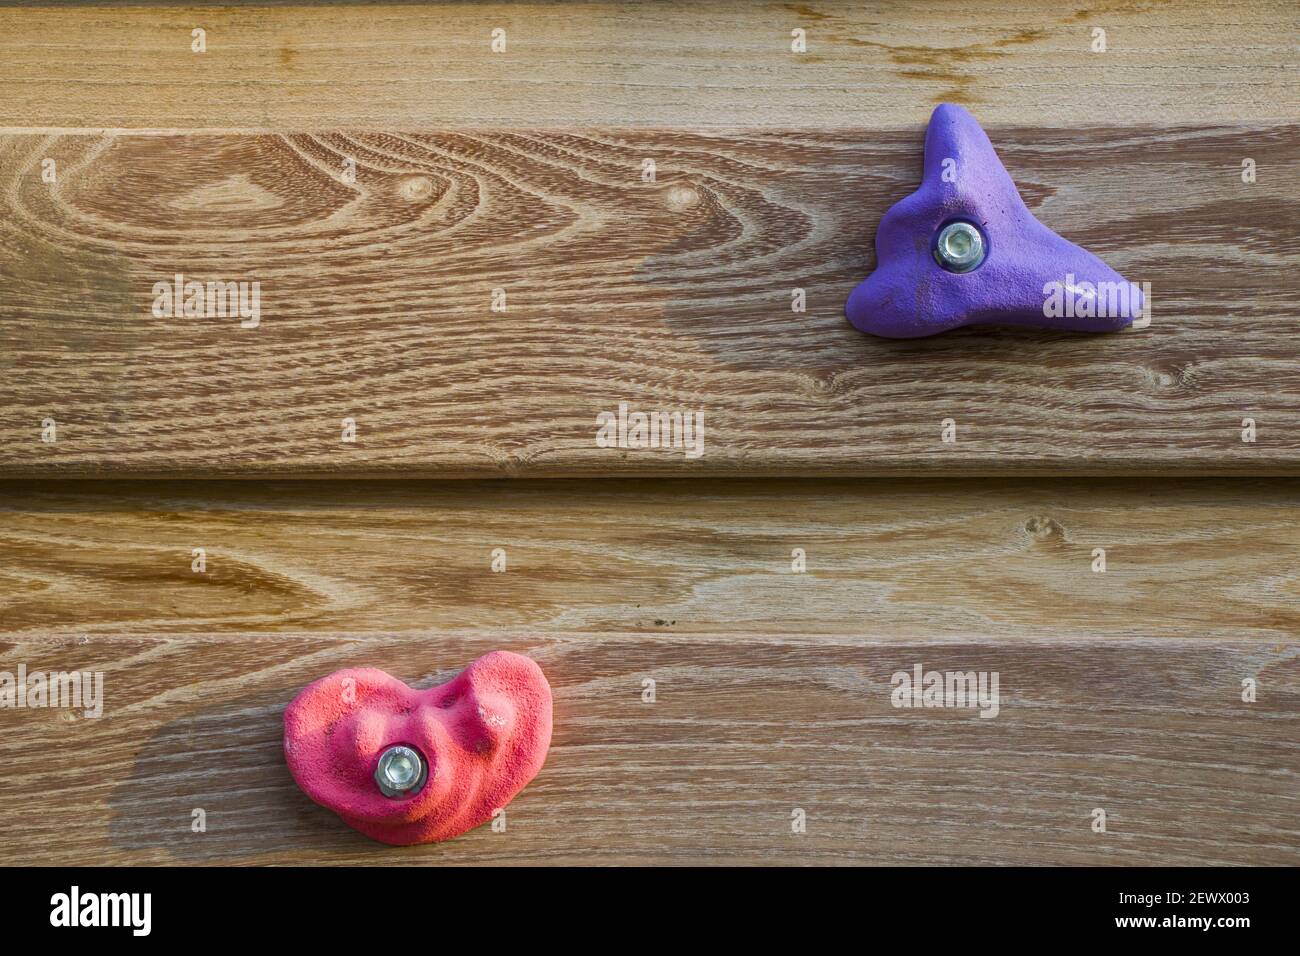 A closeup shot of a climbing wall withcolorful hanging rocks isolated on the wooden material Stock Photo